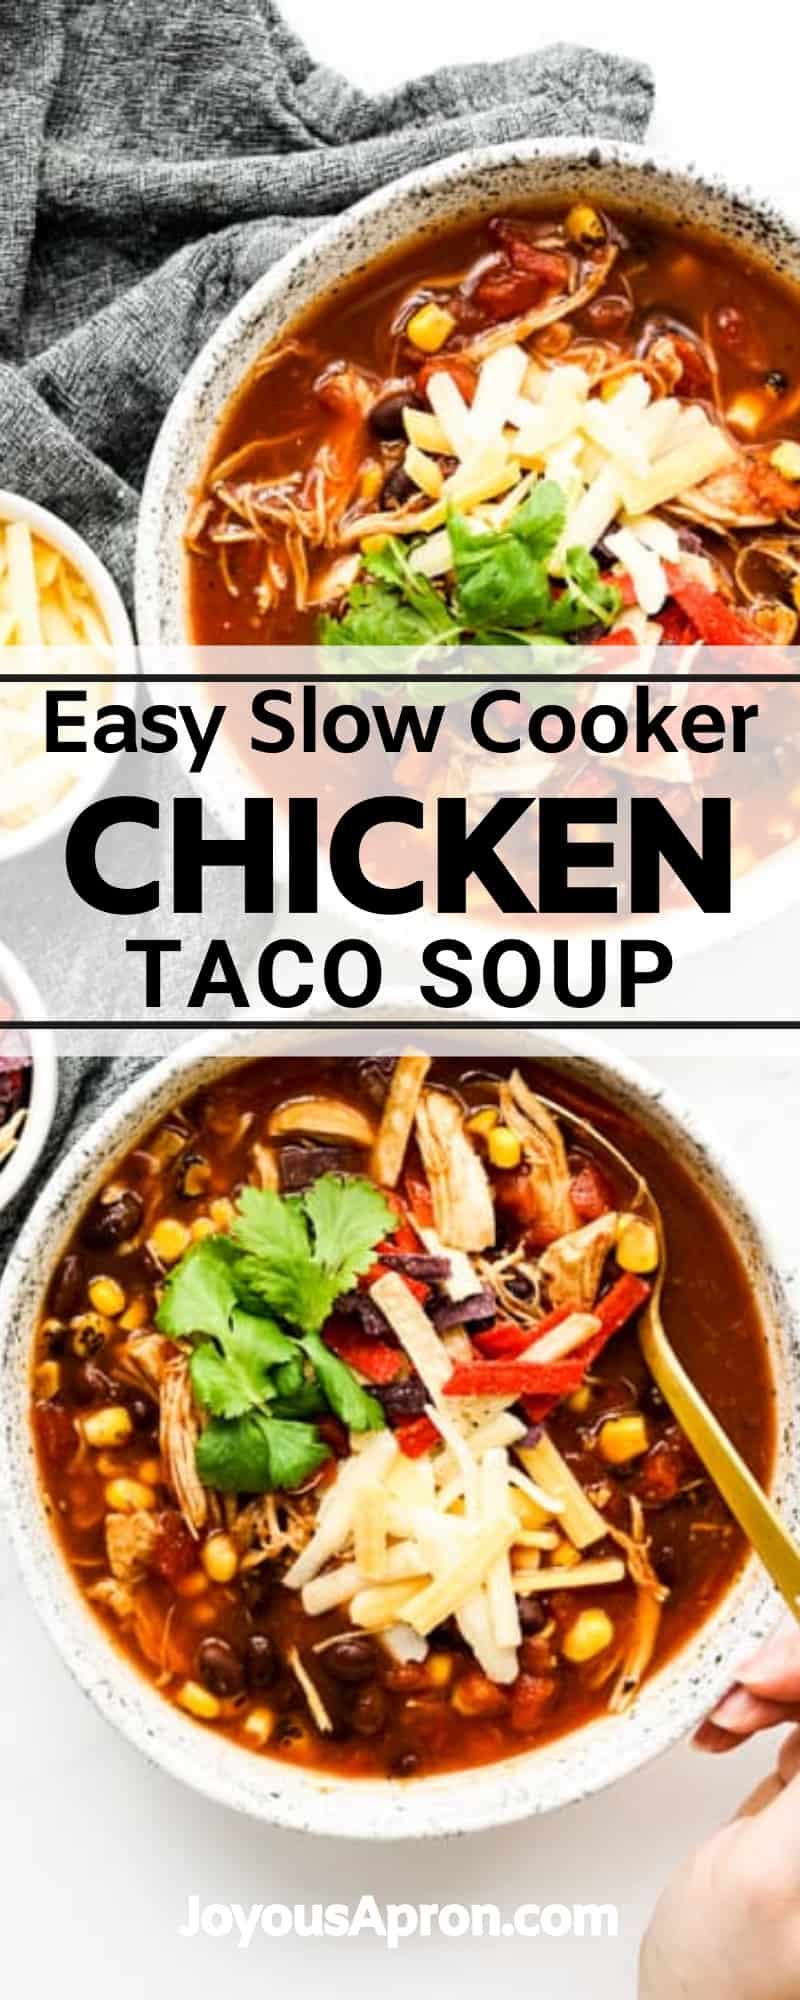 Slow Cooker Chicken Taco Soup - easy crockpot recipe! Chunky tomato based soup loaded with shredded chicken, corn, black beans, cilantro, cheese and tortilla strips. Comfort food for a cold day! An easy weeknight dinner recipe. via @joyousapron